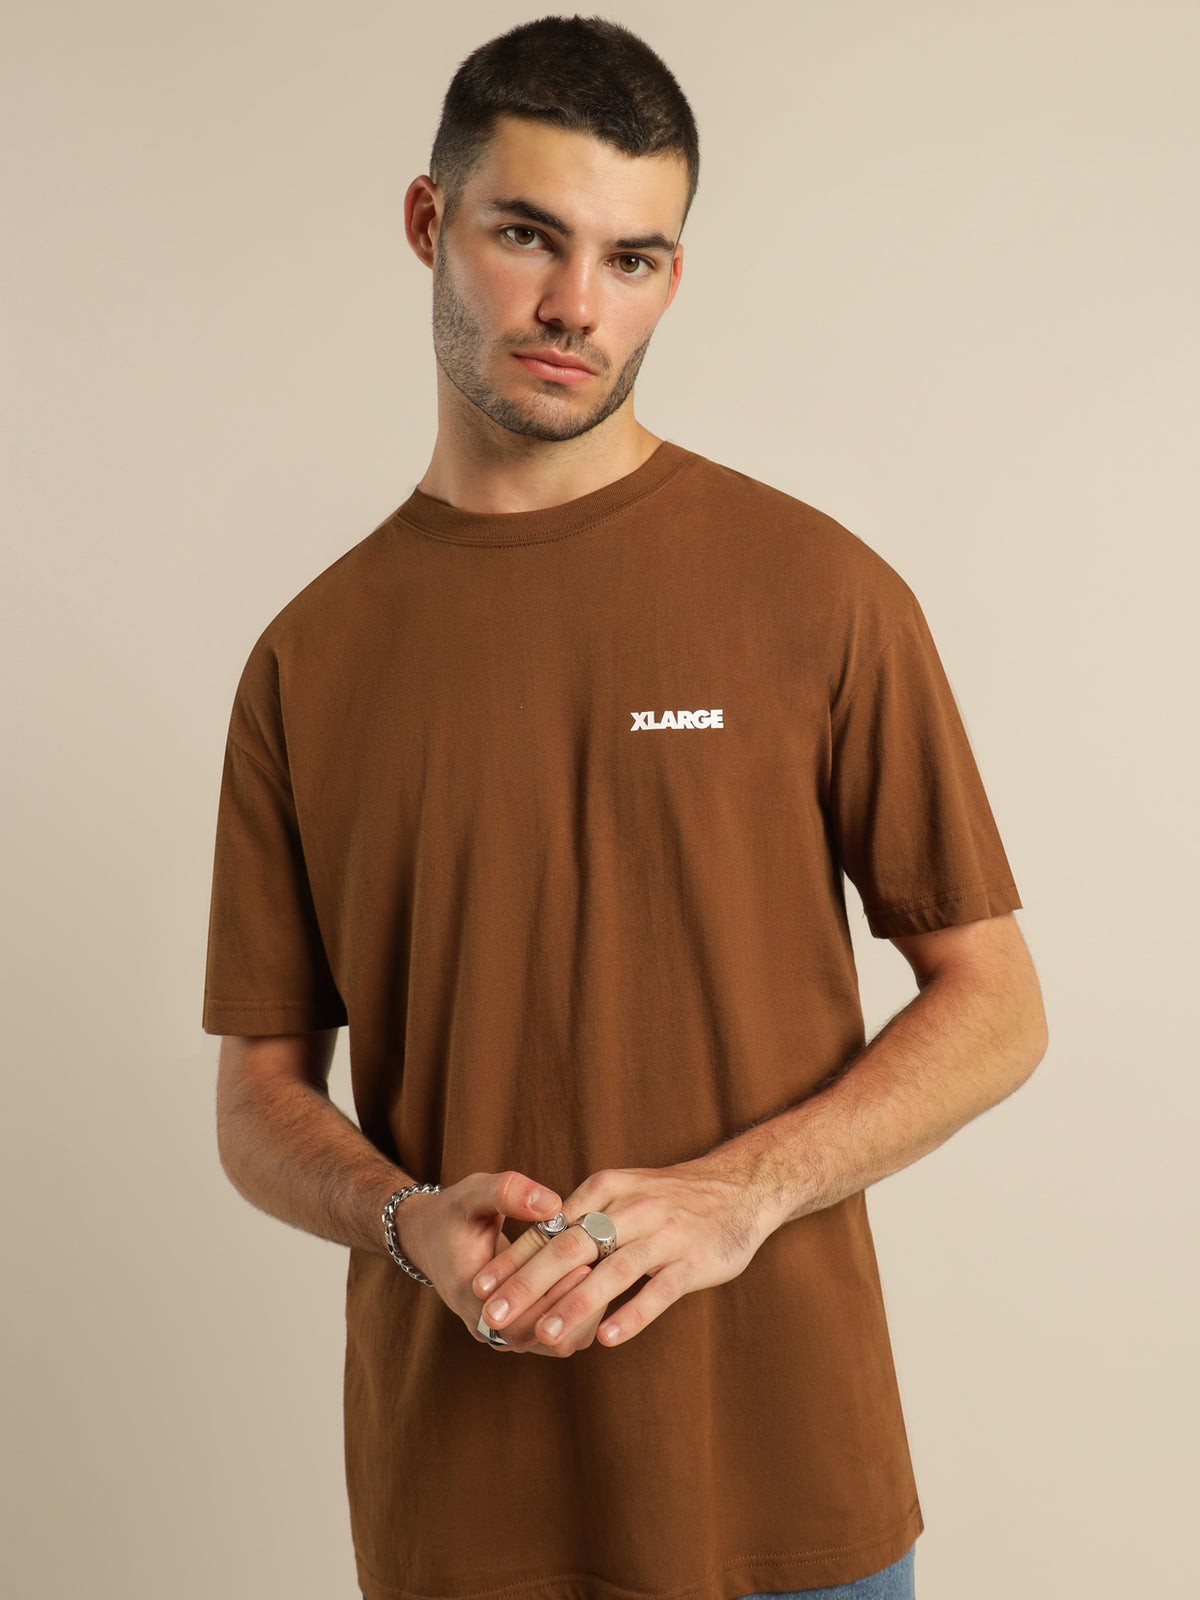 Xlarge 91 Text T-Shirt in Brown | Brown